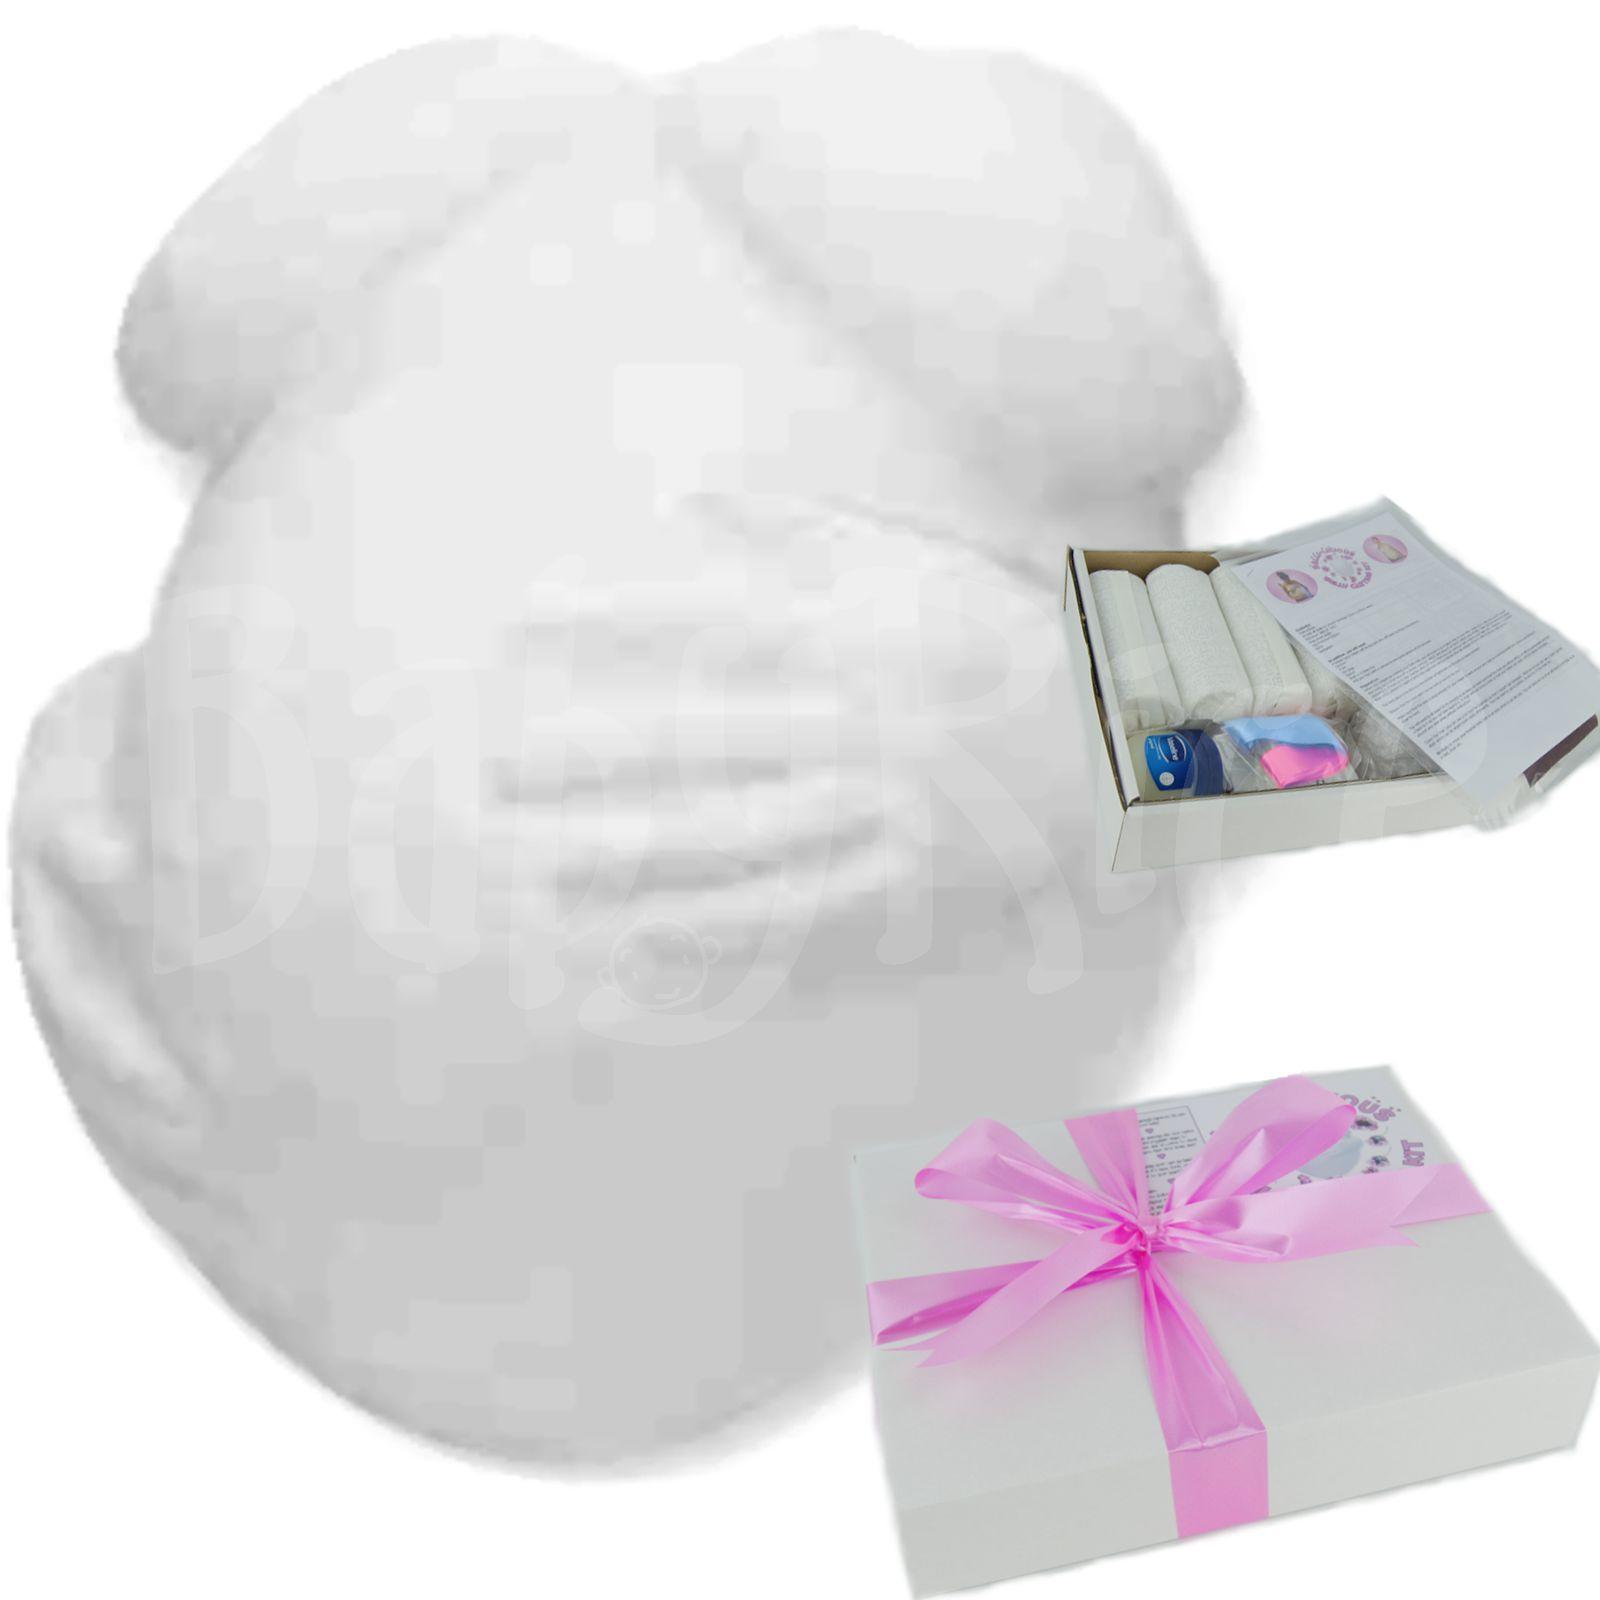 Pregnant Belly Casting Kit Pregnancy Bump Plaster Cast Gift Maternity Leave by BabyRice